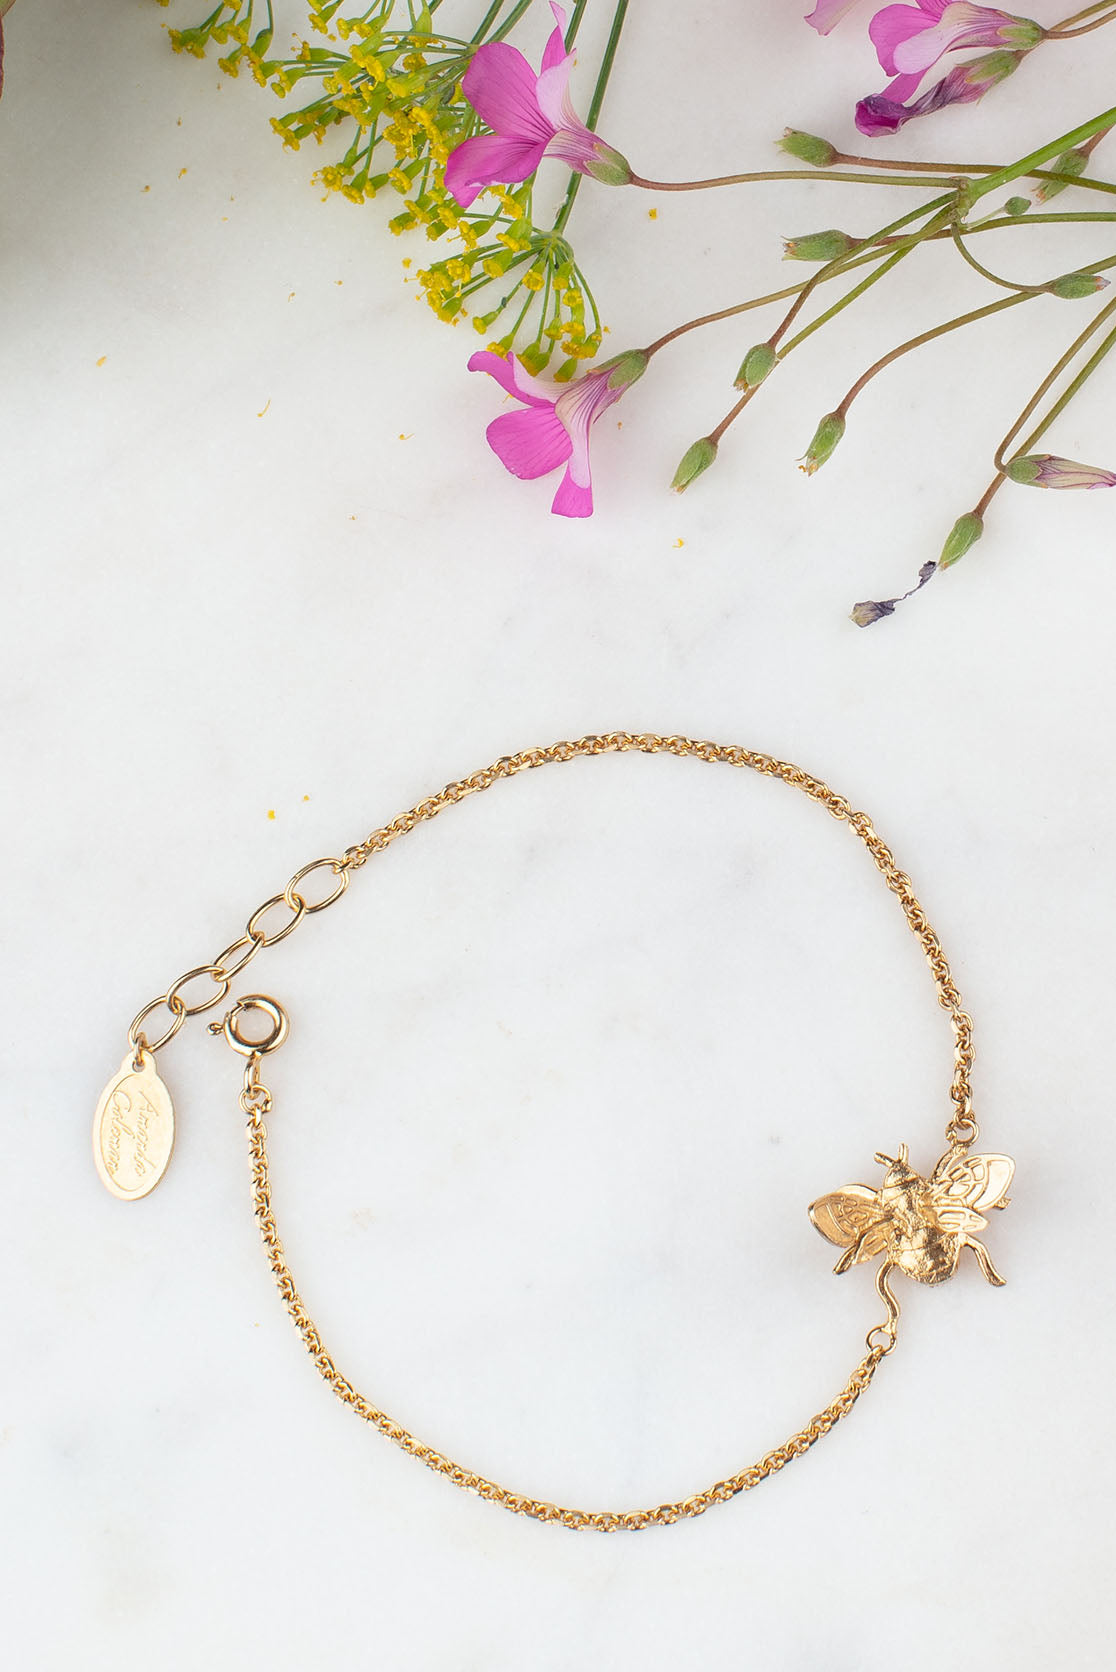 Handmade Bee Bracelet in Sterling Silver and Gold